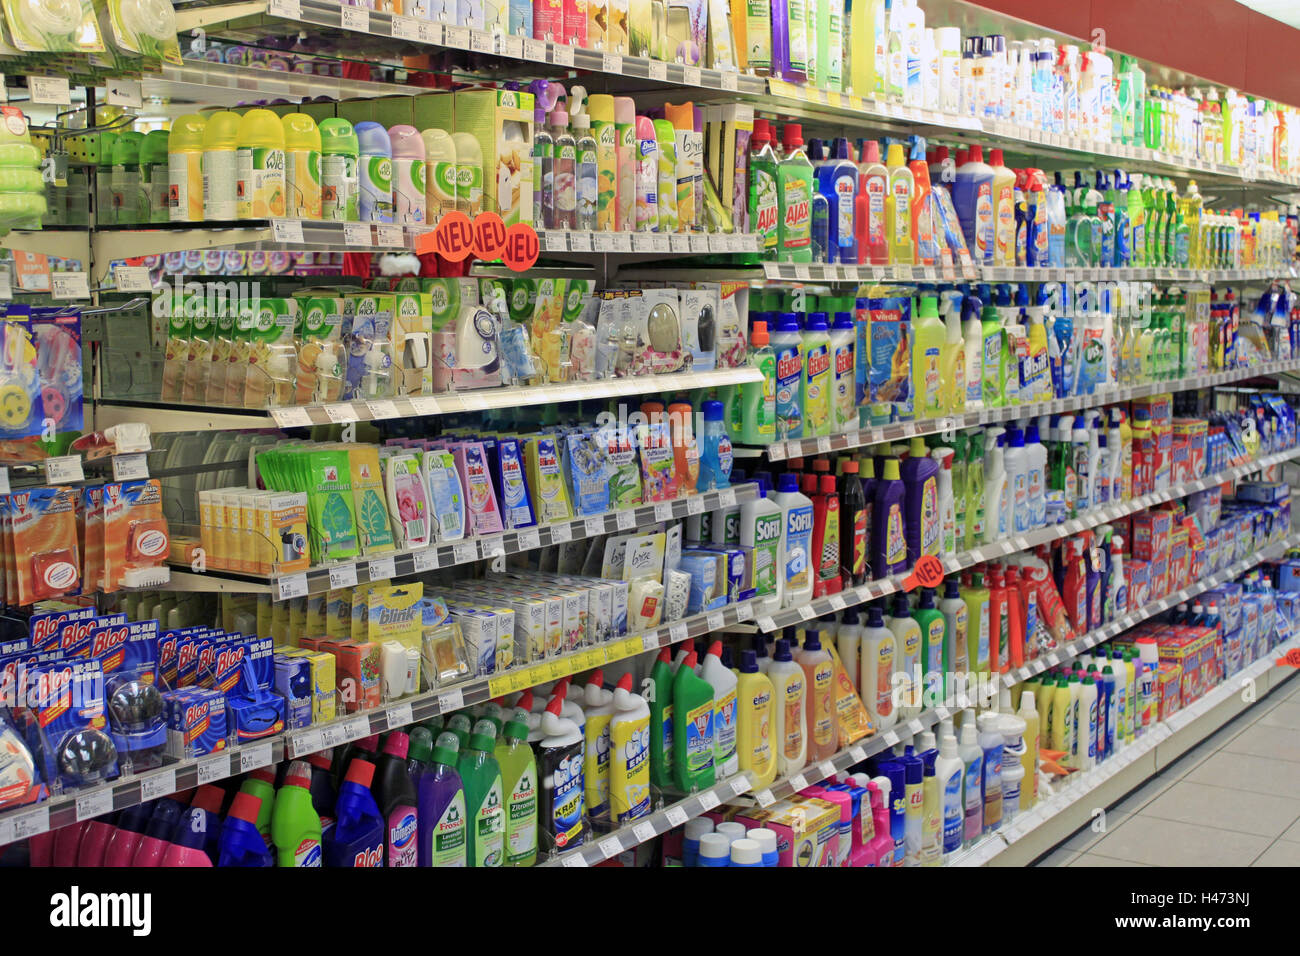 Supermarket shelf, cleaning material, passed away, clean supermarket, shelf, range of goods, Germany, goods, offer, household, cleaning, cleanly, cleanness, hygiene, odour, odoriferous substances, environment, environment protection, different, sorts, env Stock Photo